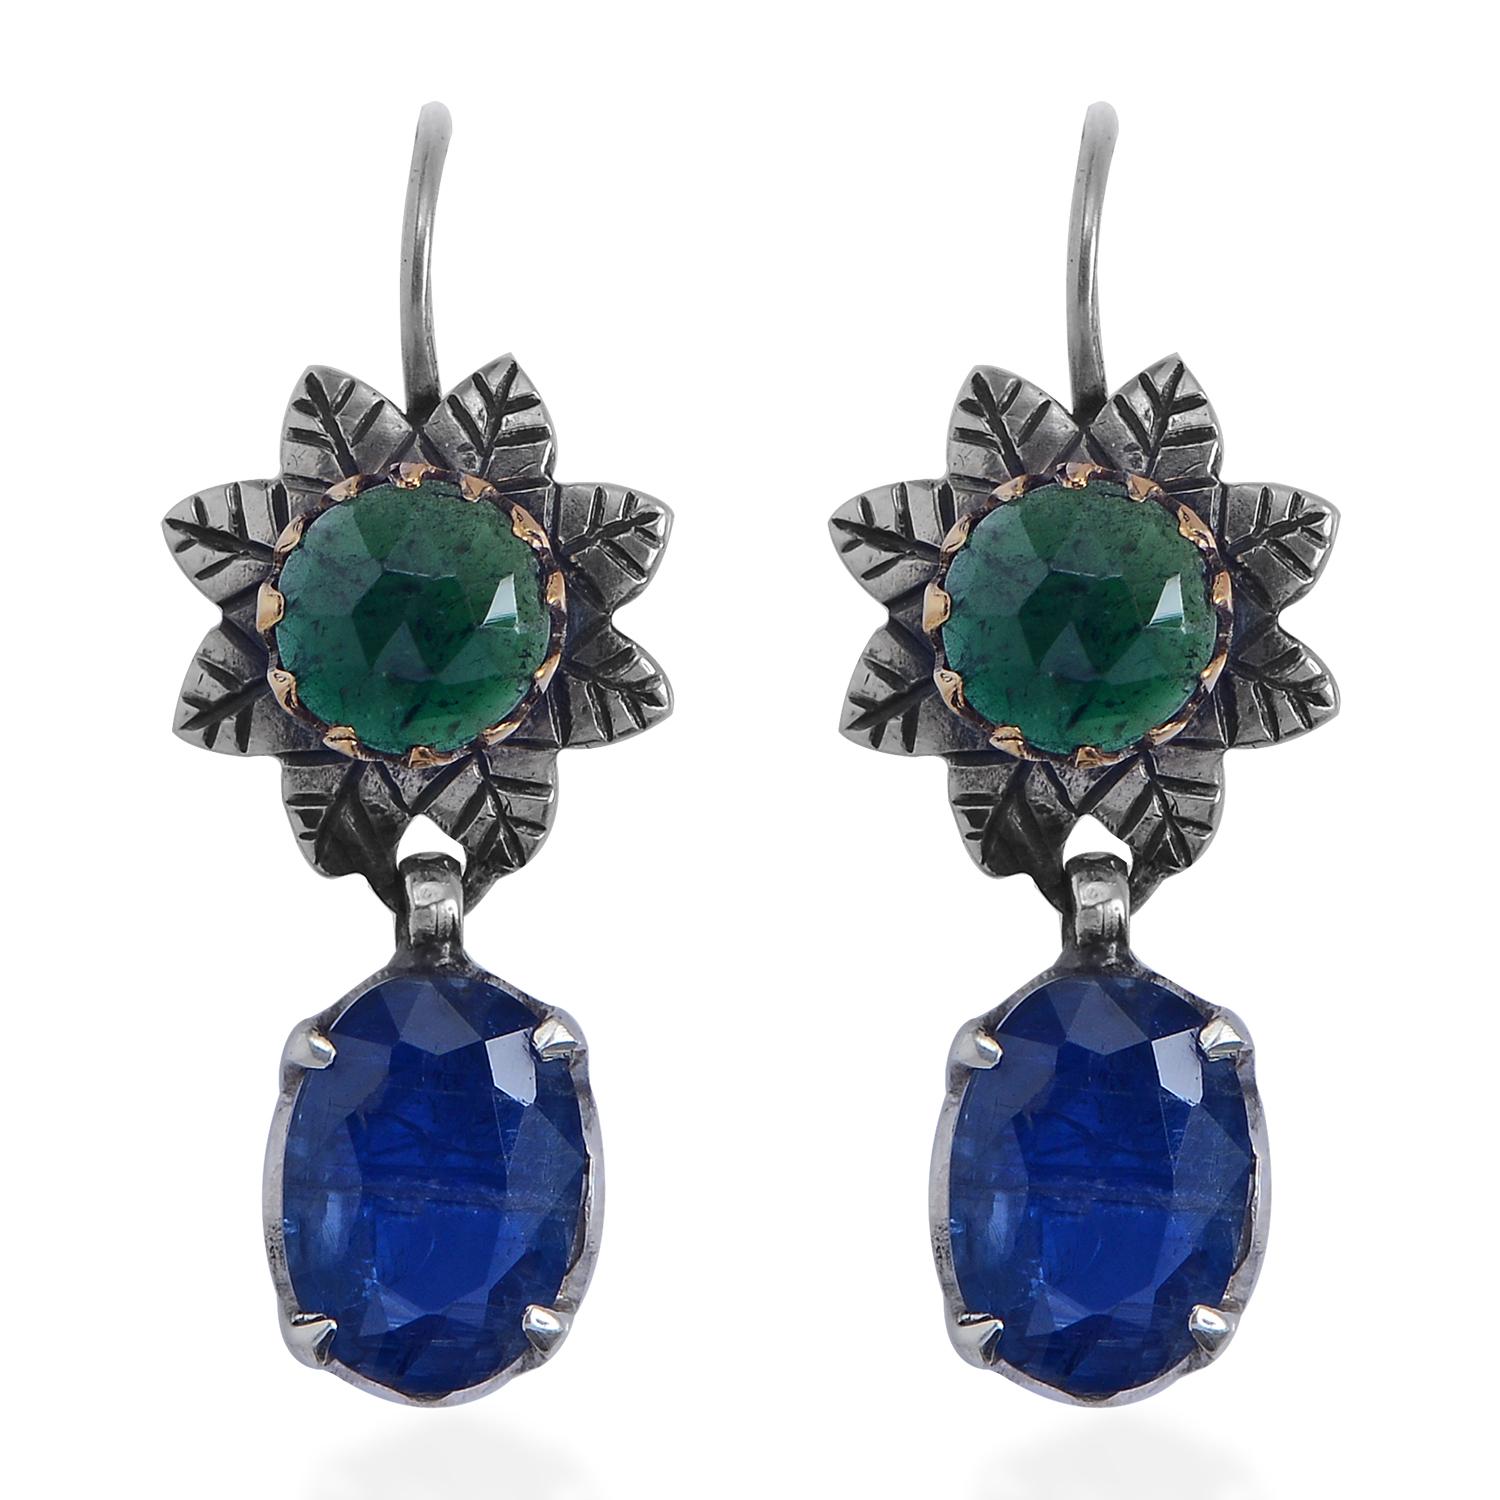 The Tanzanite Diopside Silver 18 Karat Gold Drop Earrings are one of a kind earrings. Handmade in our workshops, they have tanzanite oval shaped drops, which are capped with chrome diopside set in 18kt gold in hand engraved sterling silver .flower